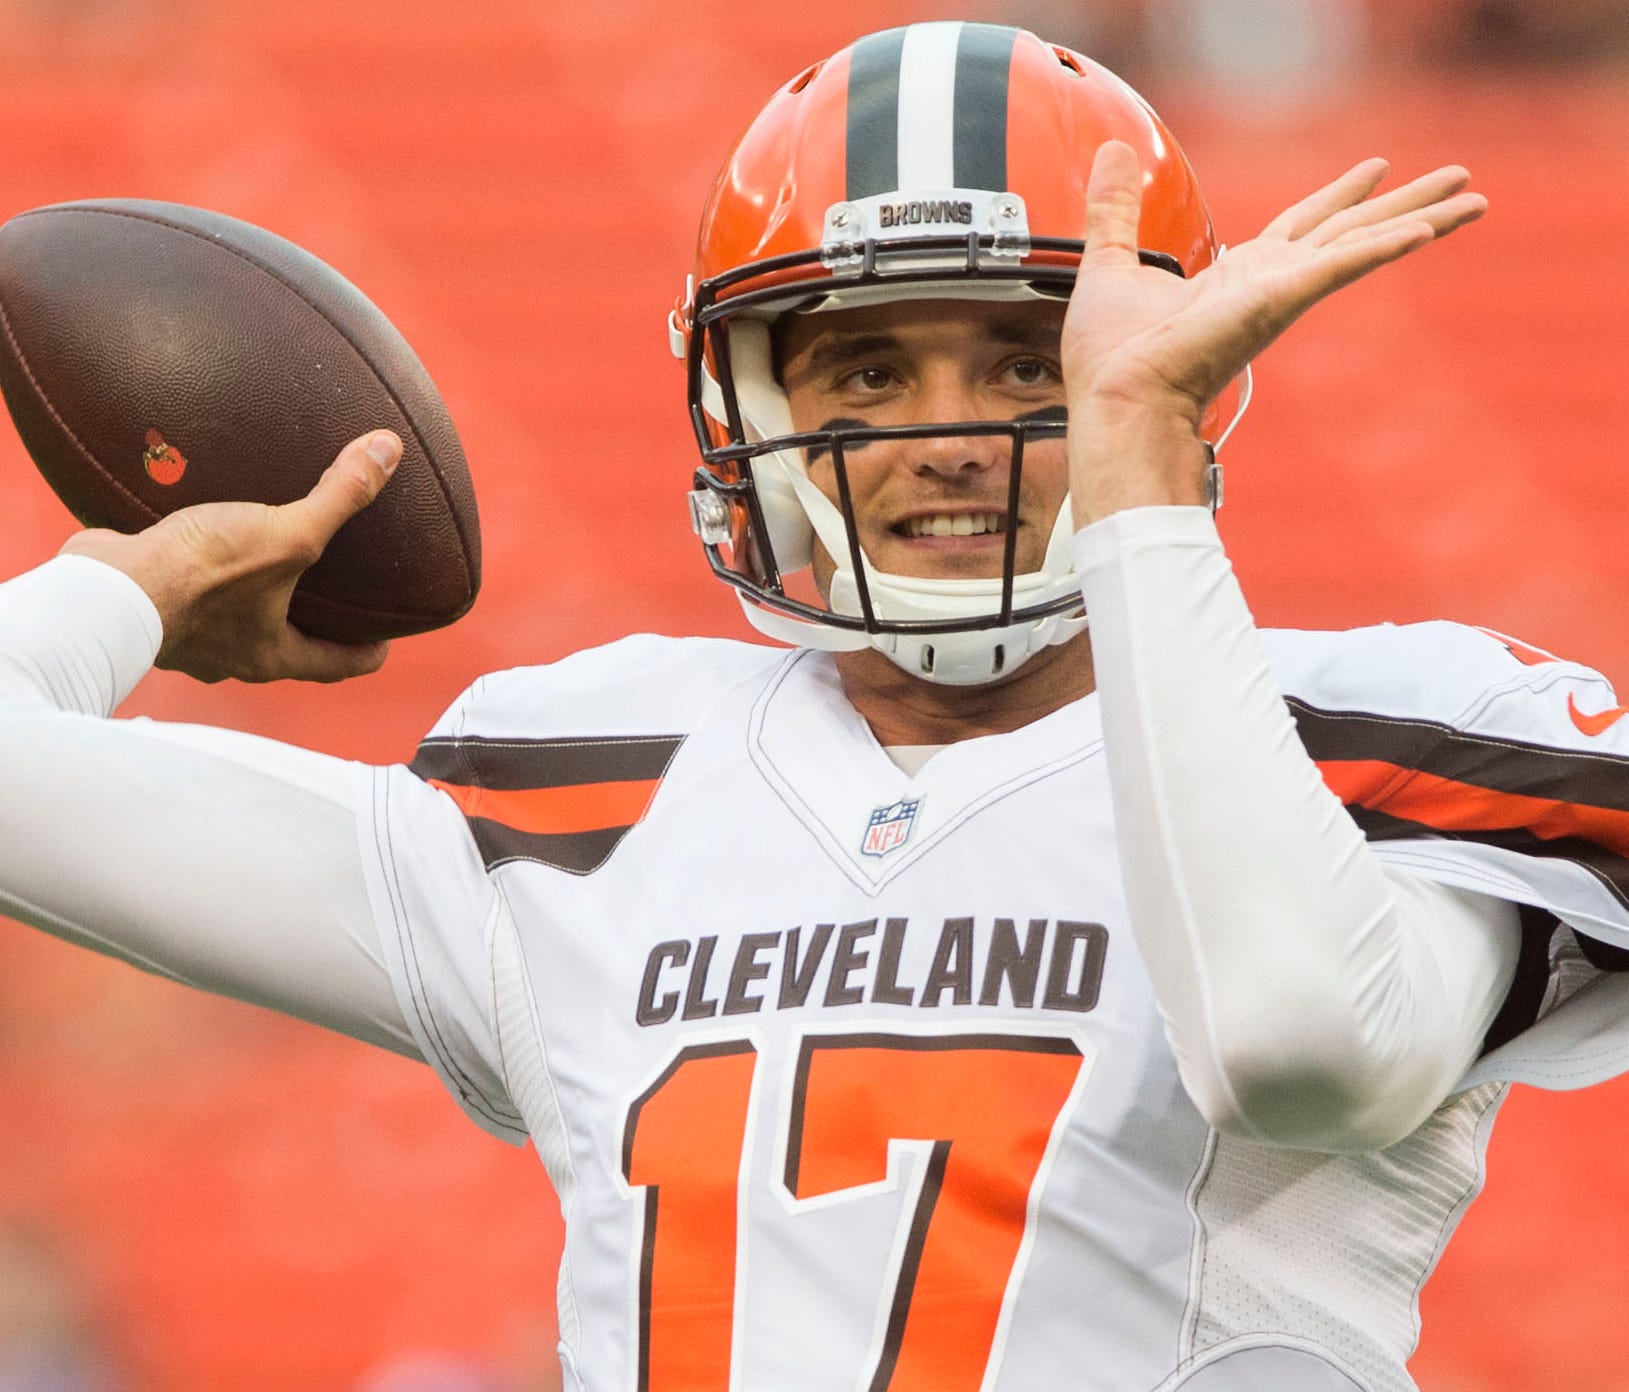 Browns QB Brock Osweiler is 13-8 in 21 NFL starts.